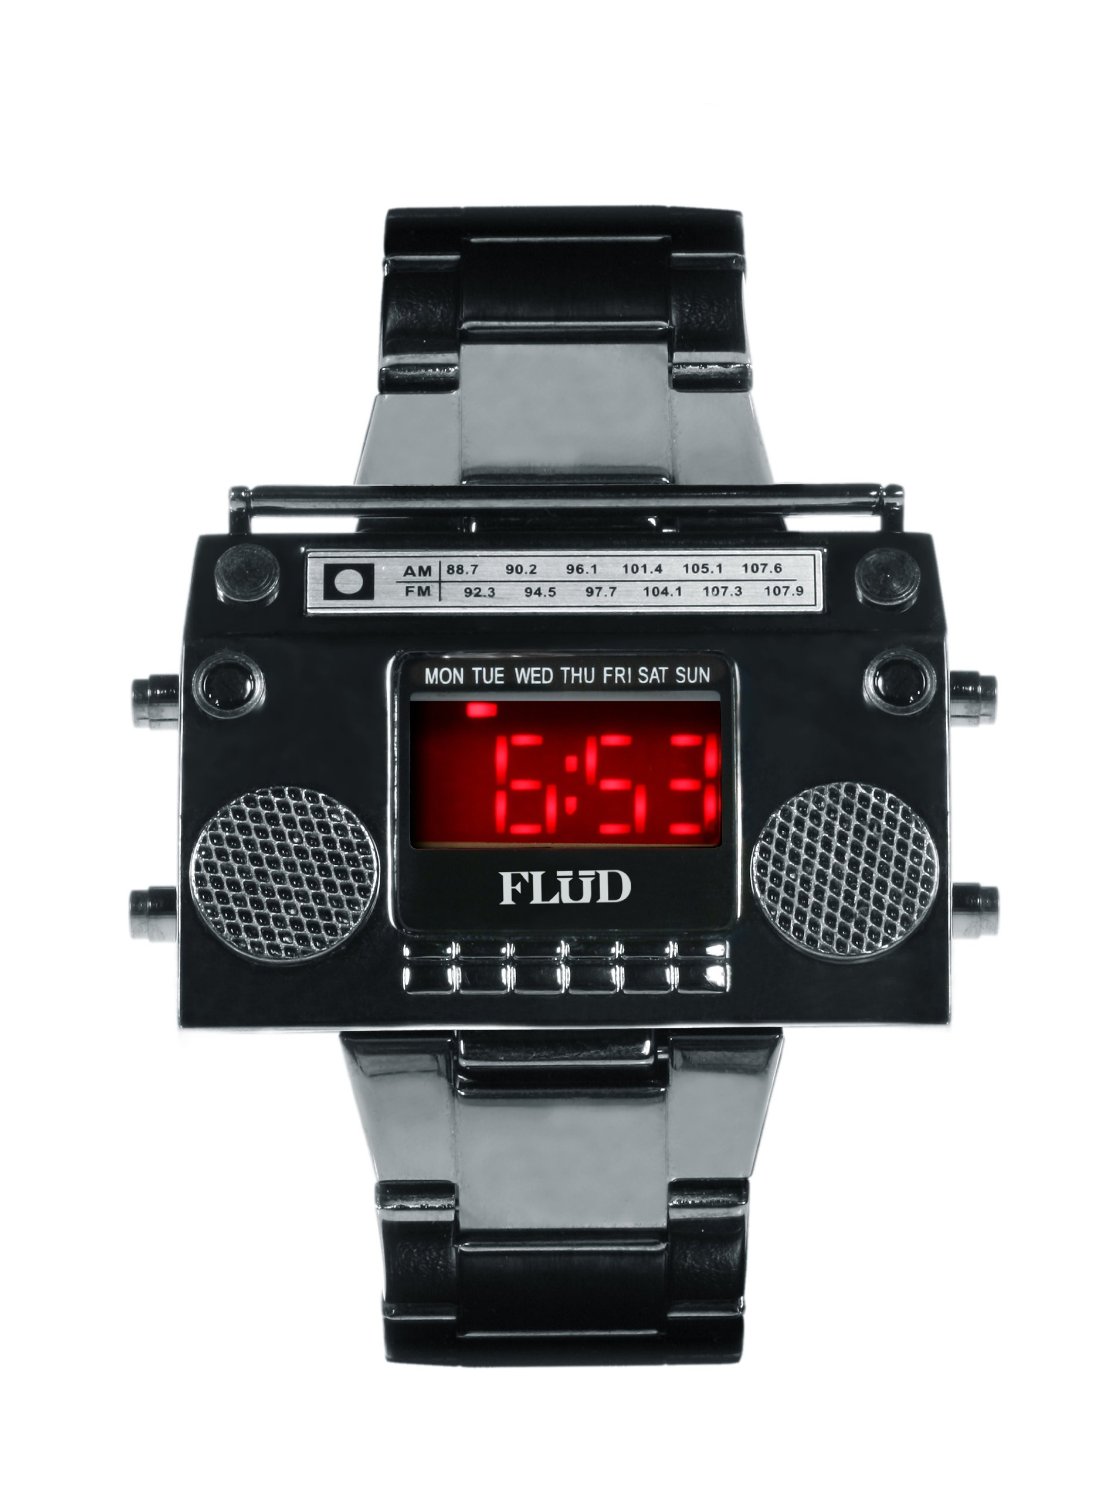 Boombox Retro Watch Fuses The ’80s With Today